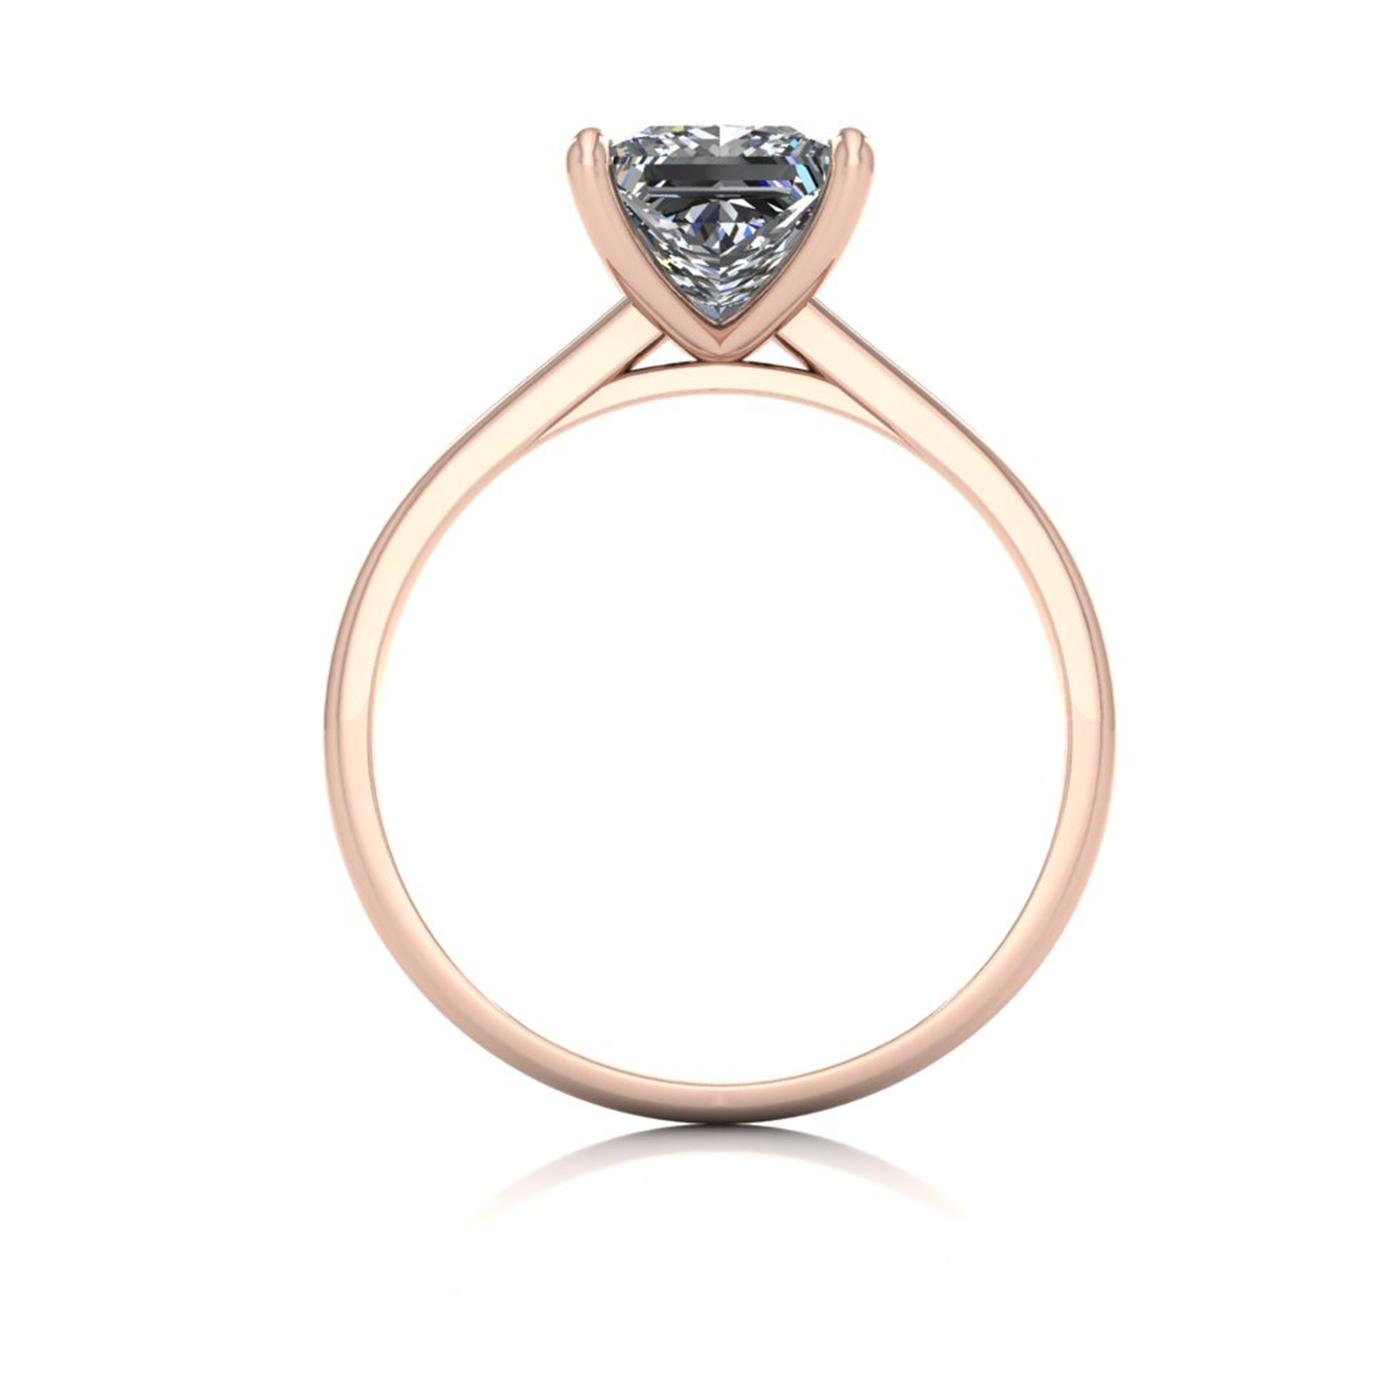 18k rose gold  1,50 ct 4 prongs solitaire princess cut diamond engagement ring with whisper thin band